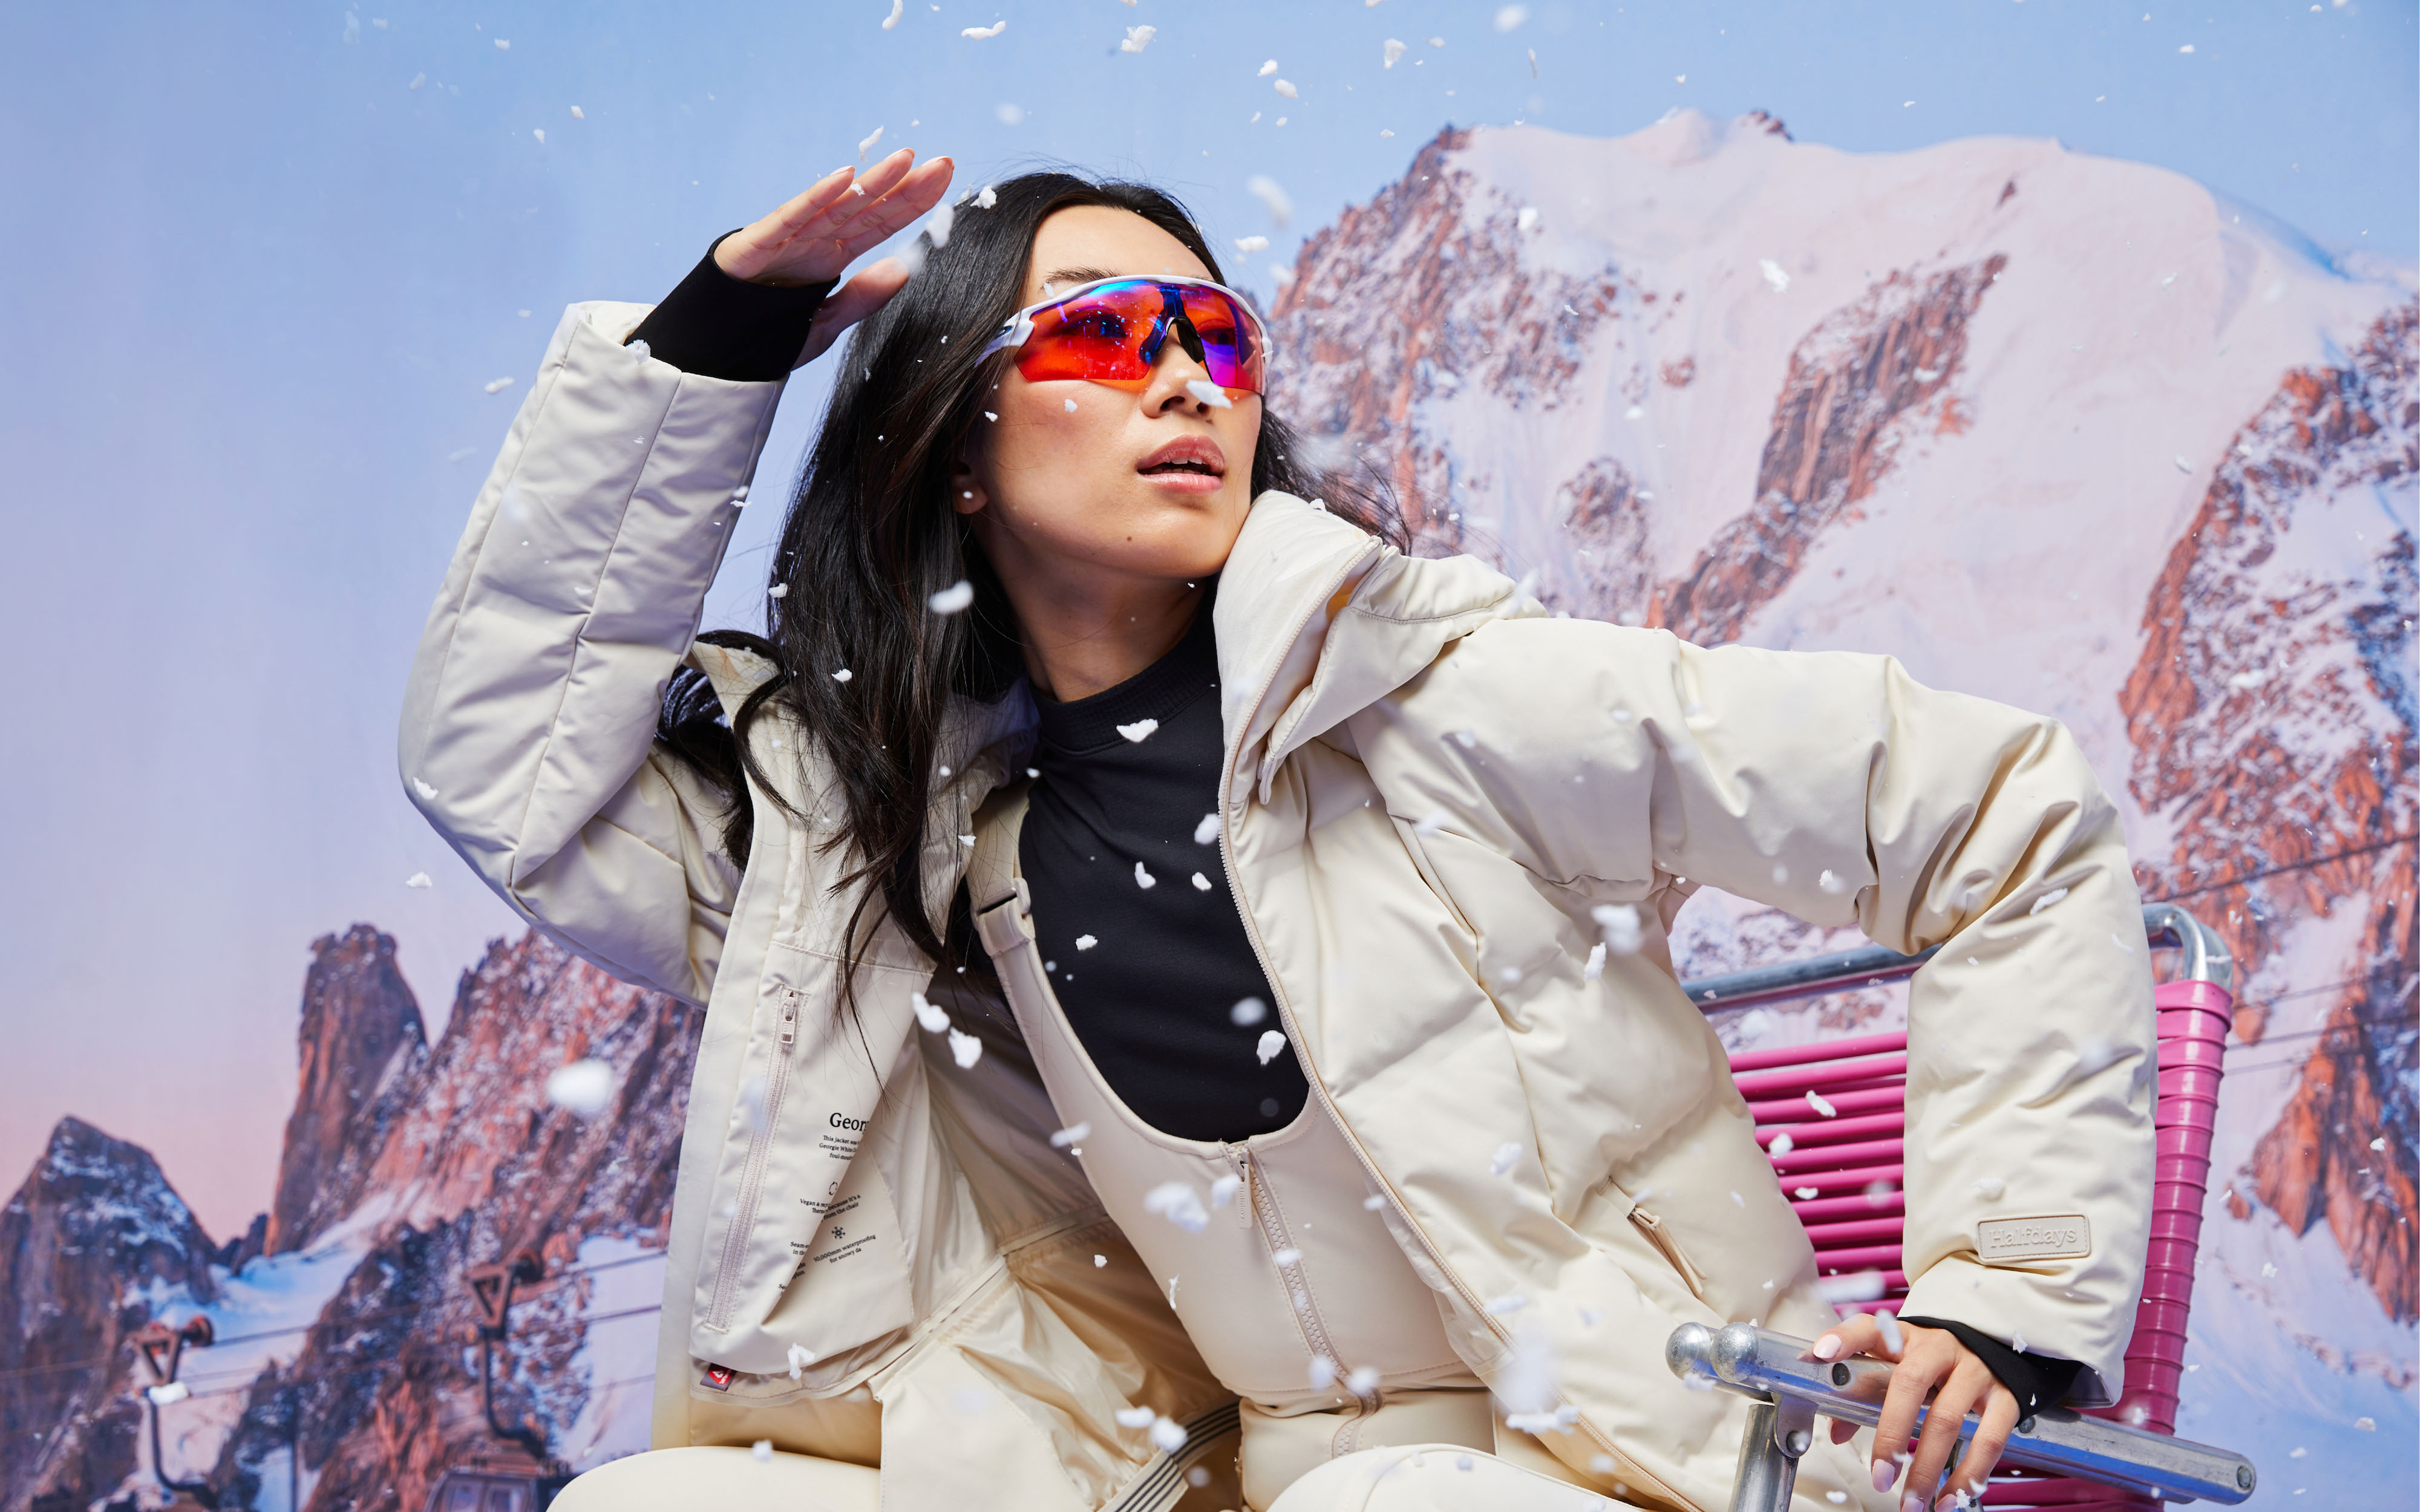 Skiwear Looks You Need Before Hitting The Slopes This Winter